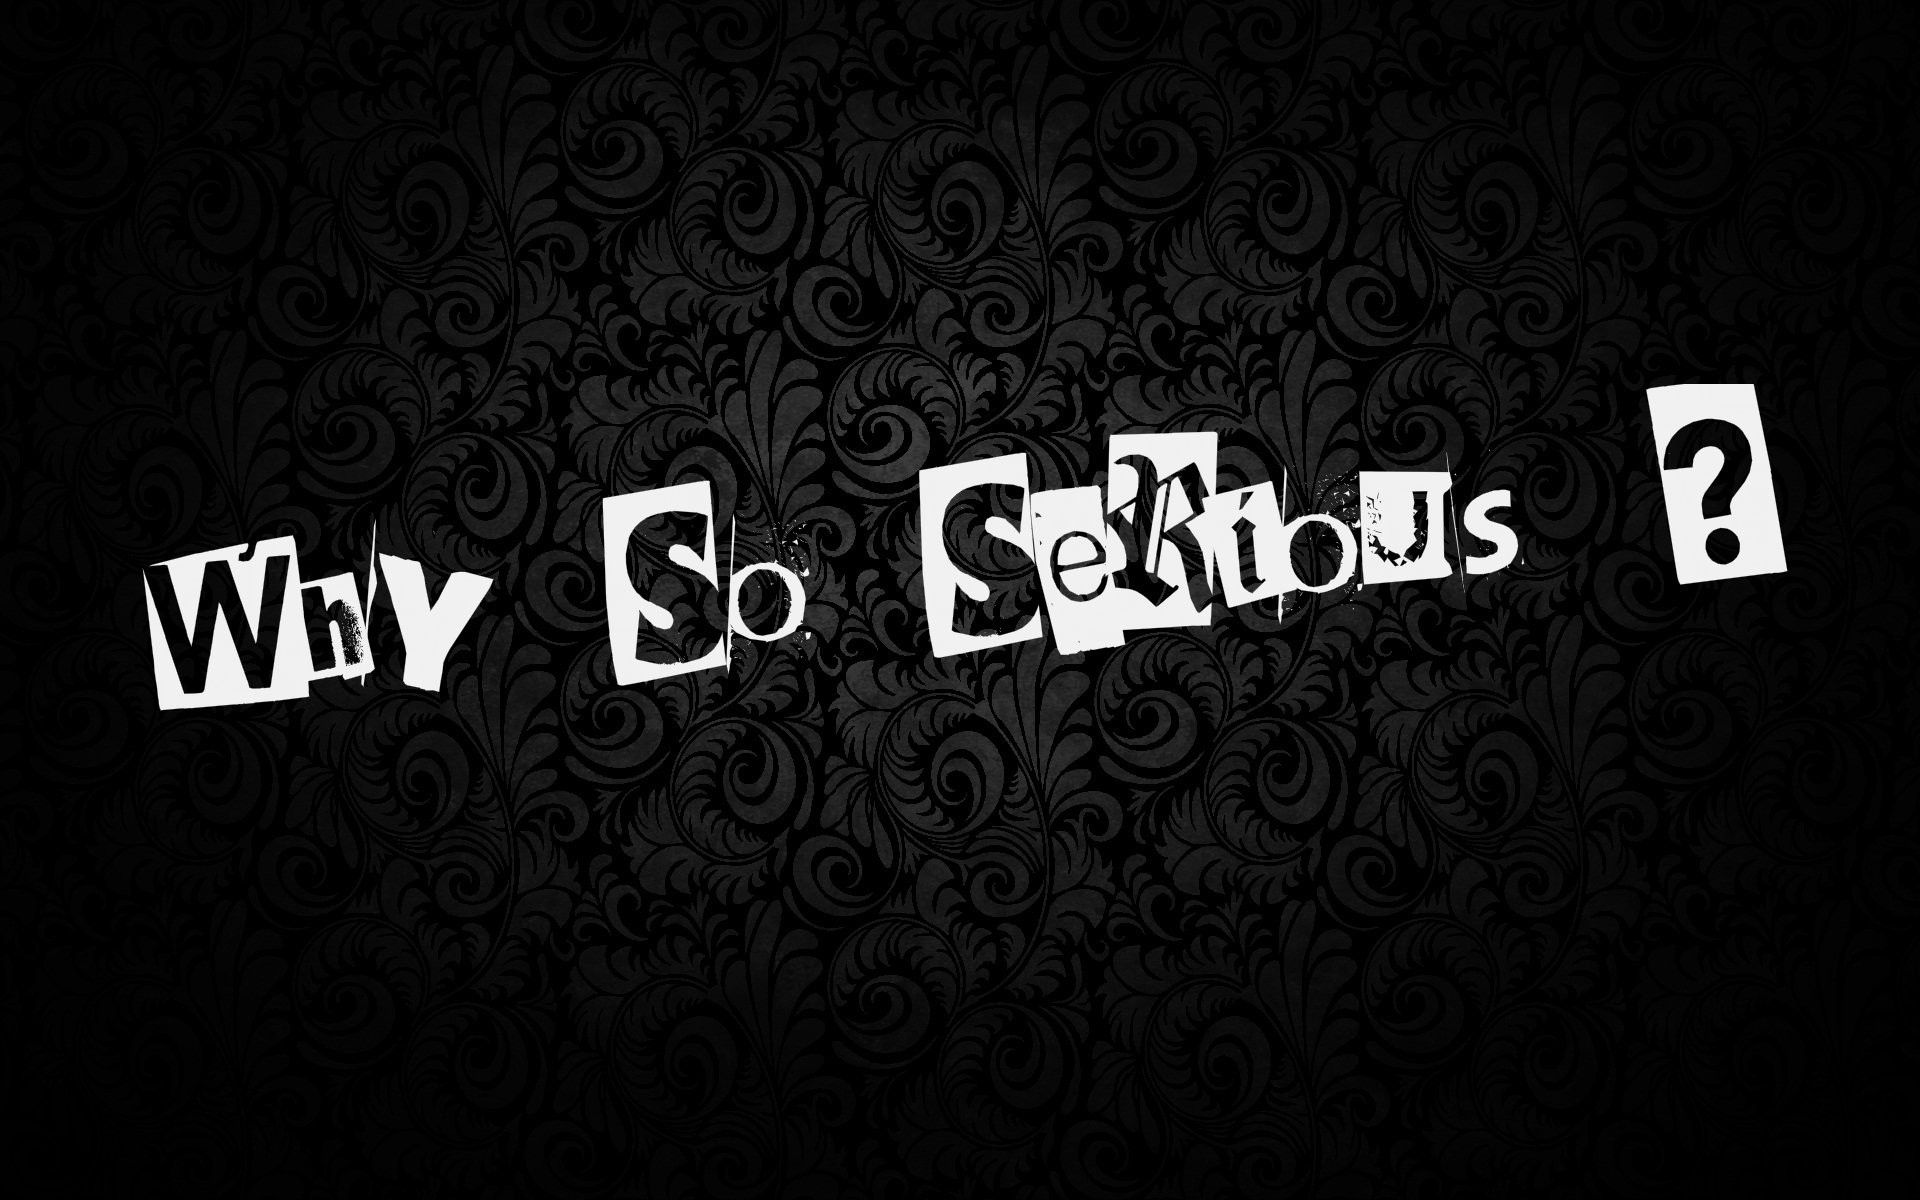 118844 download wallpaper words, background, texture, inscription, why so serious screensavers and pictures for free